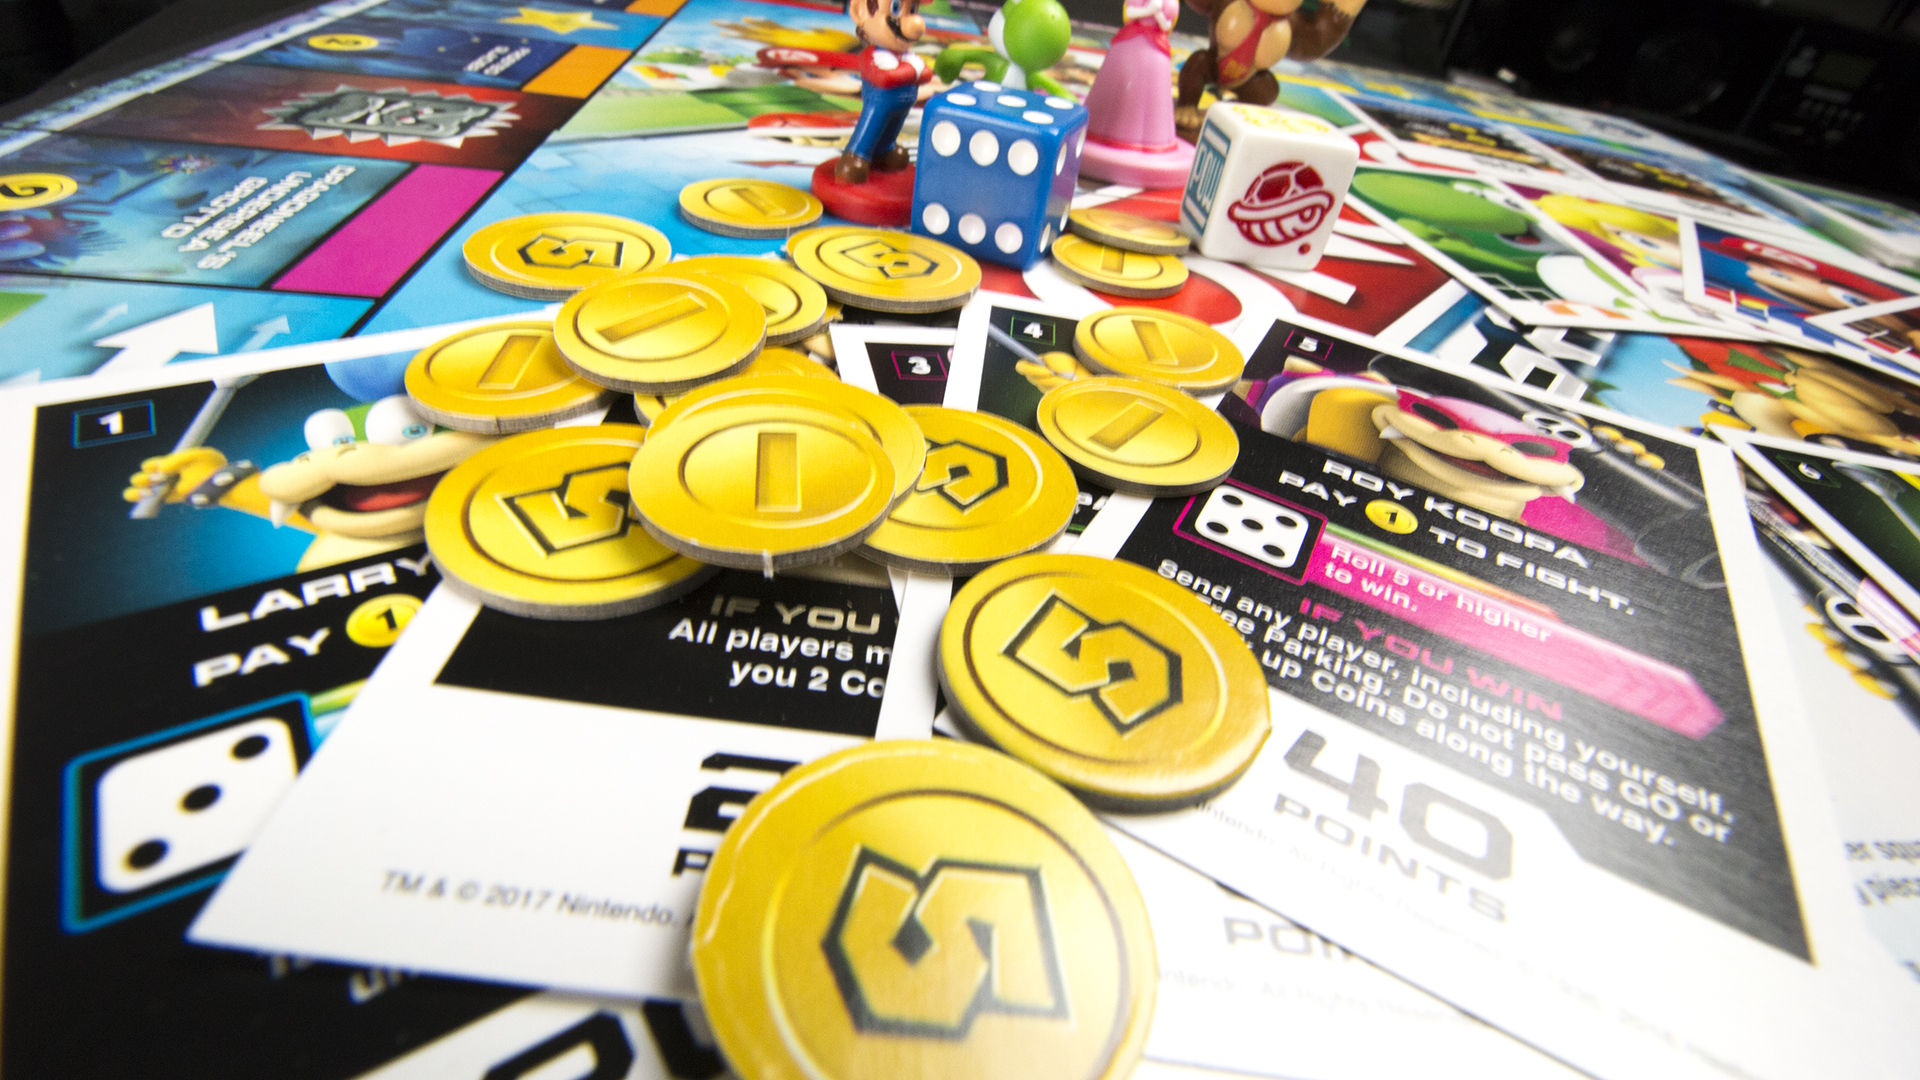 Mario-Themed Monopoly Gamer Has Power-Ups And Boss Battles